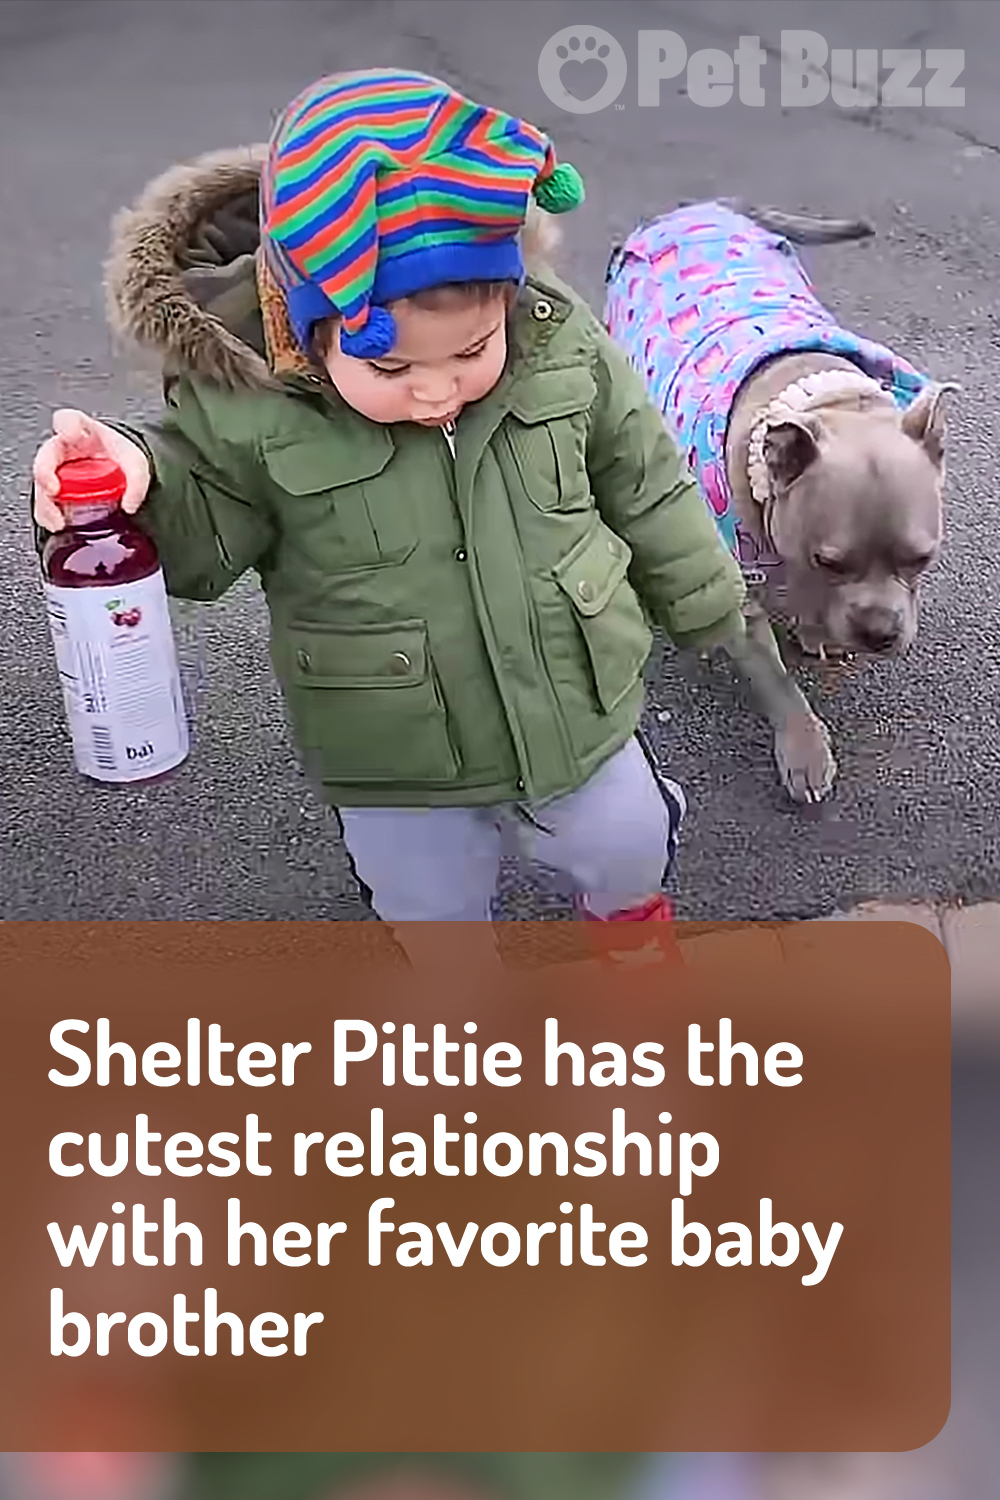 Shelter Pittie has the cutest relationship with her favorite baby brother